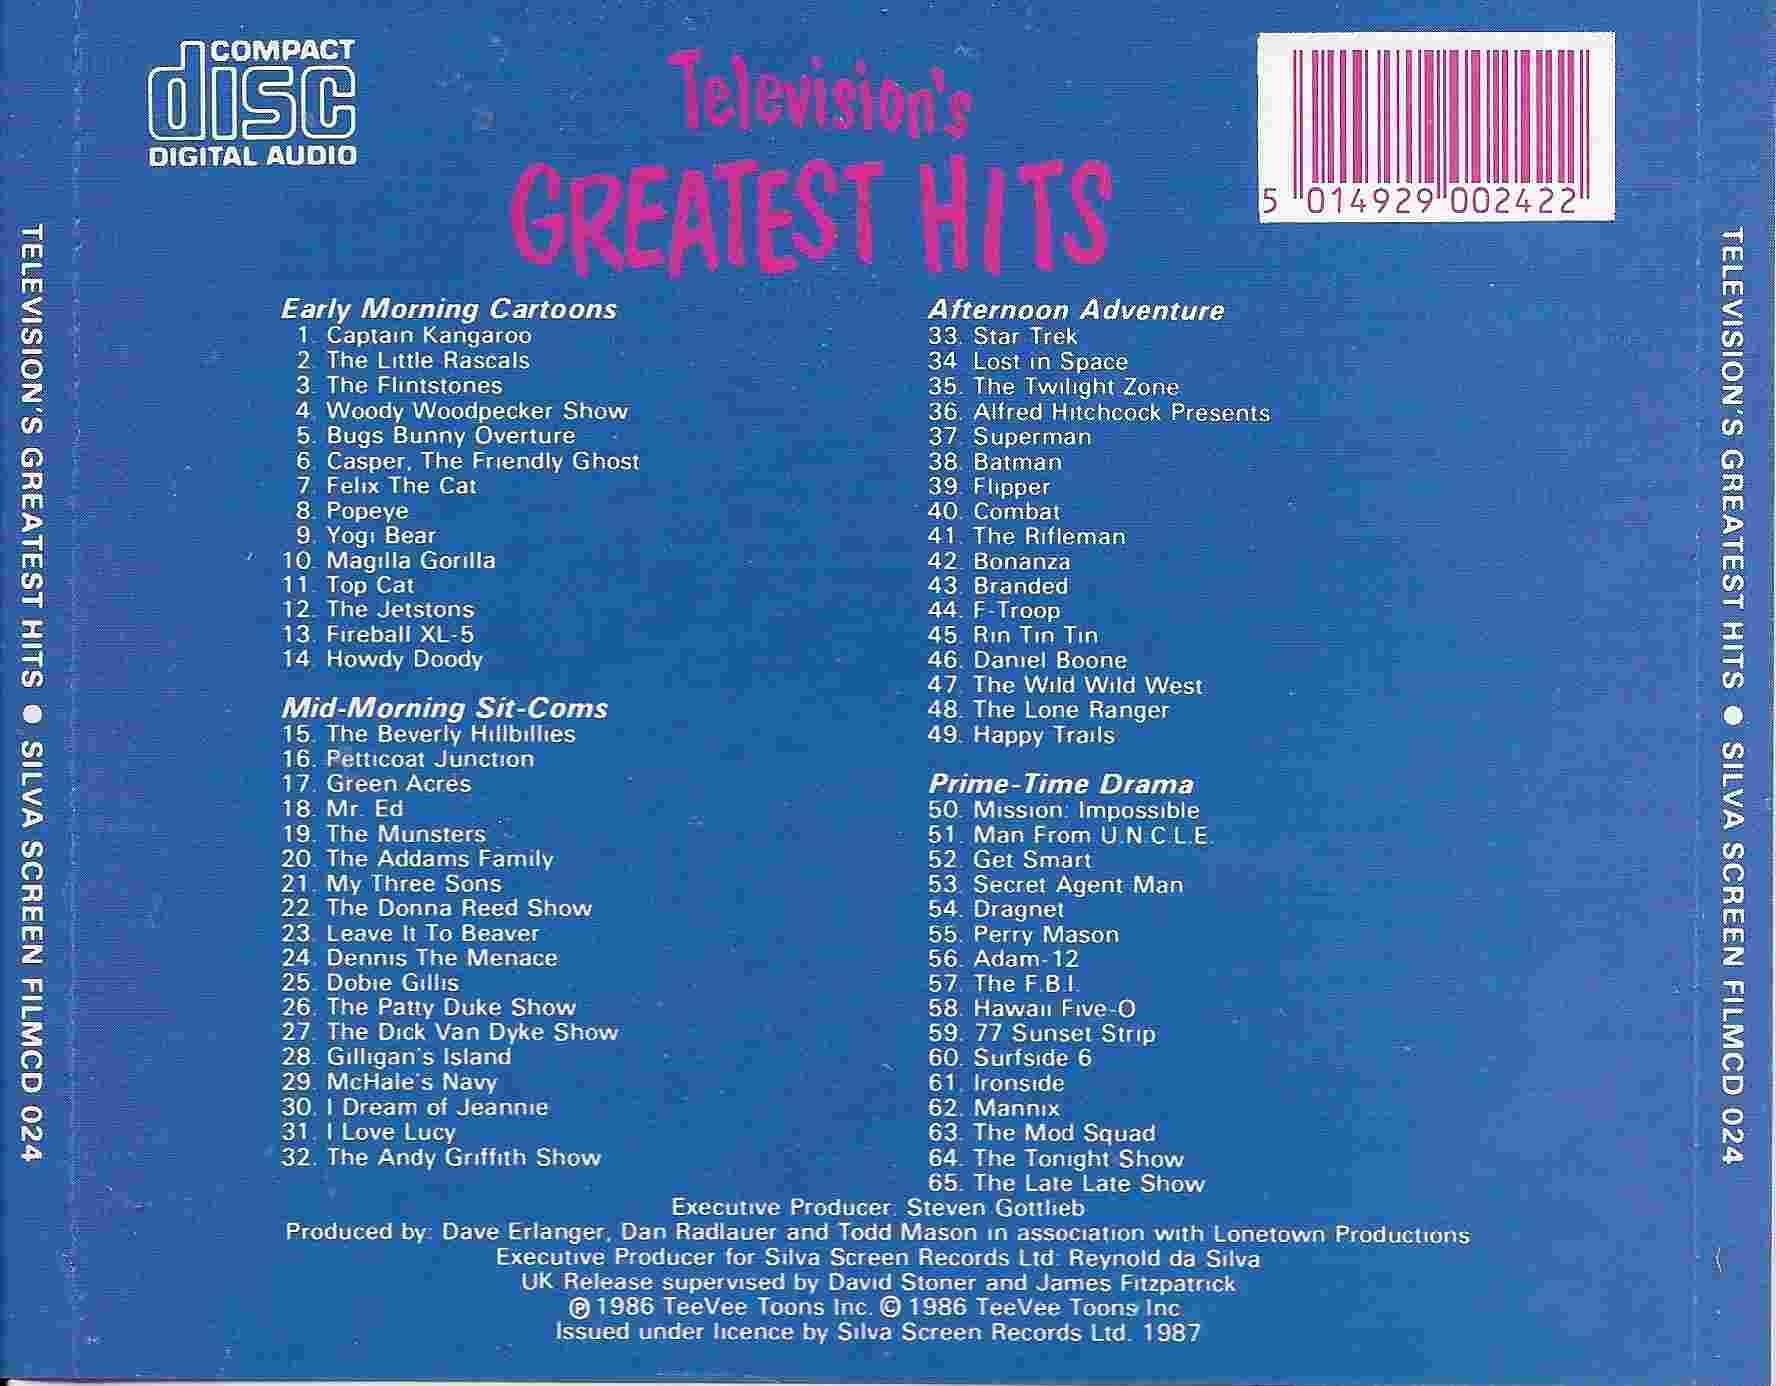 Picture of FILMCD 024 Television's greatest hits - Volume 1 by artist Various from ITV, Channel 4 and Channel 5 library